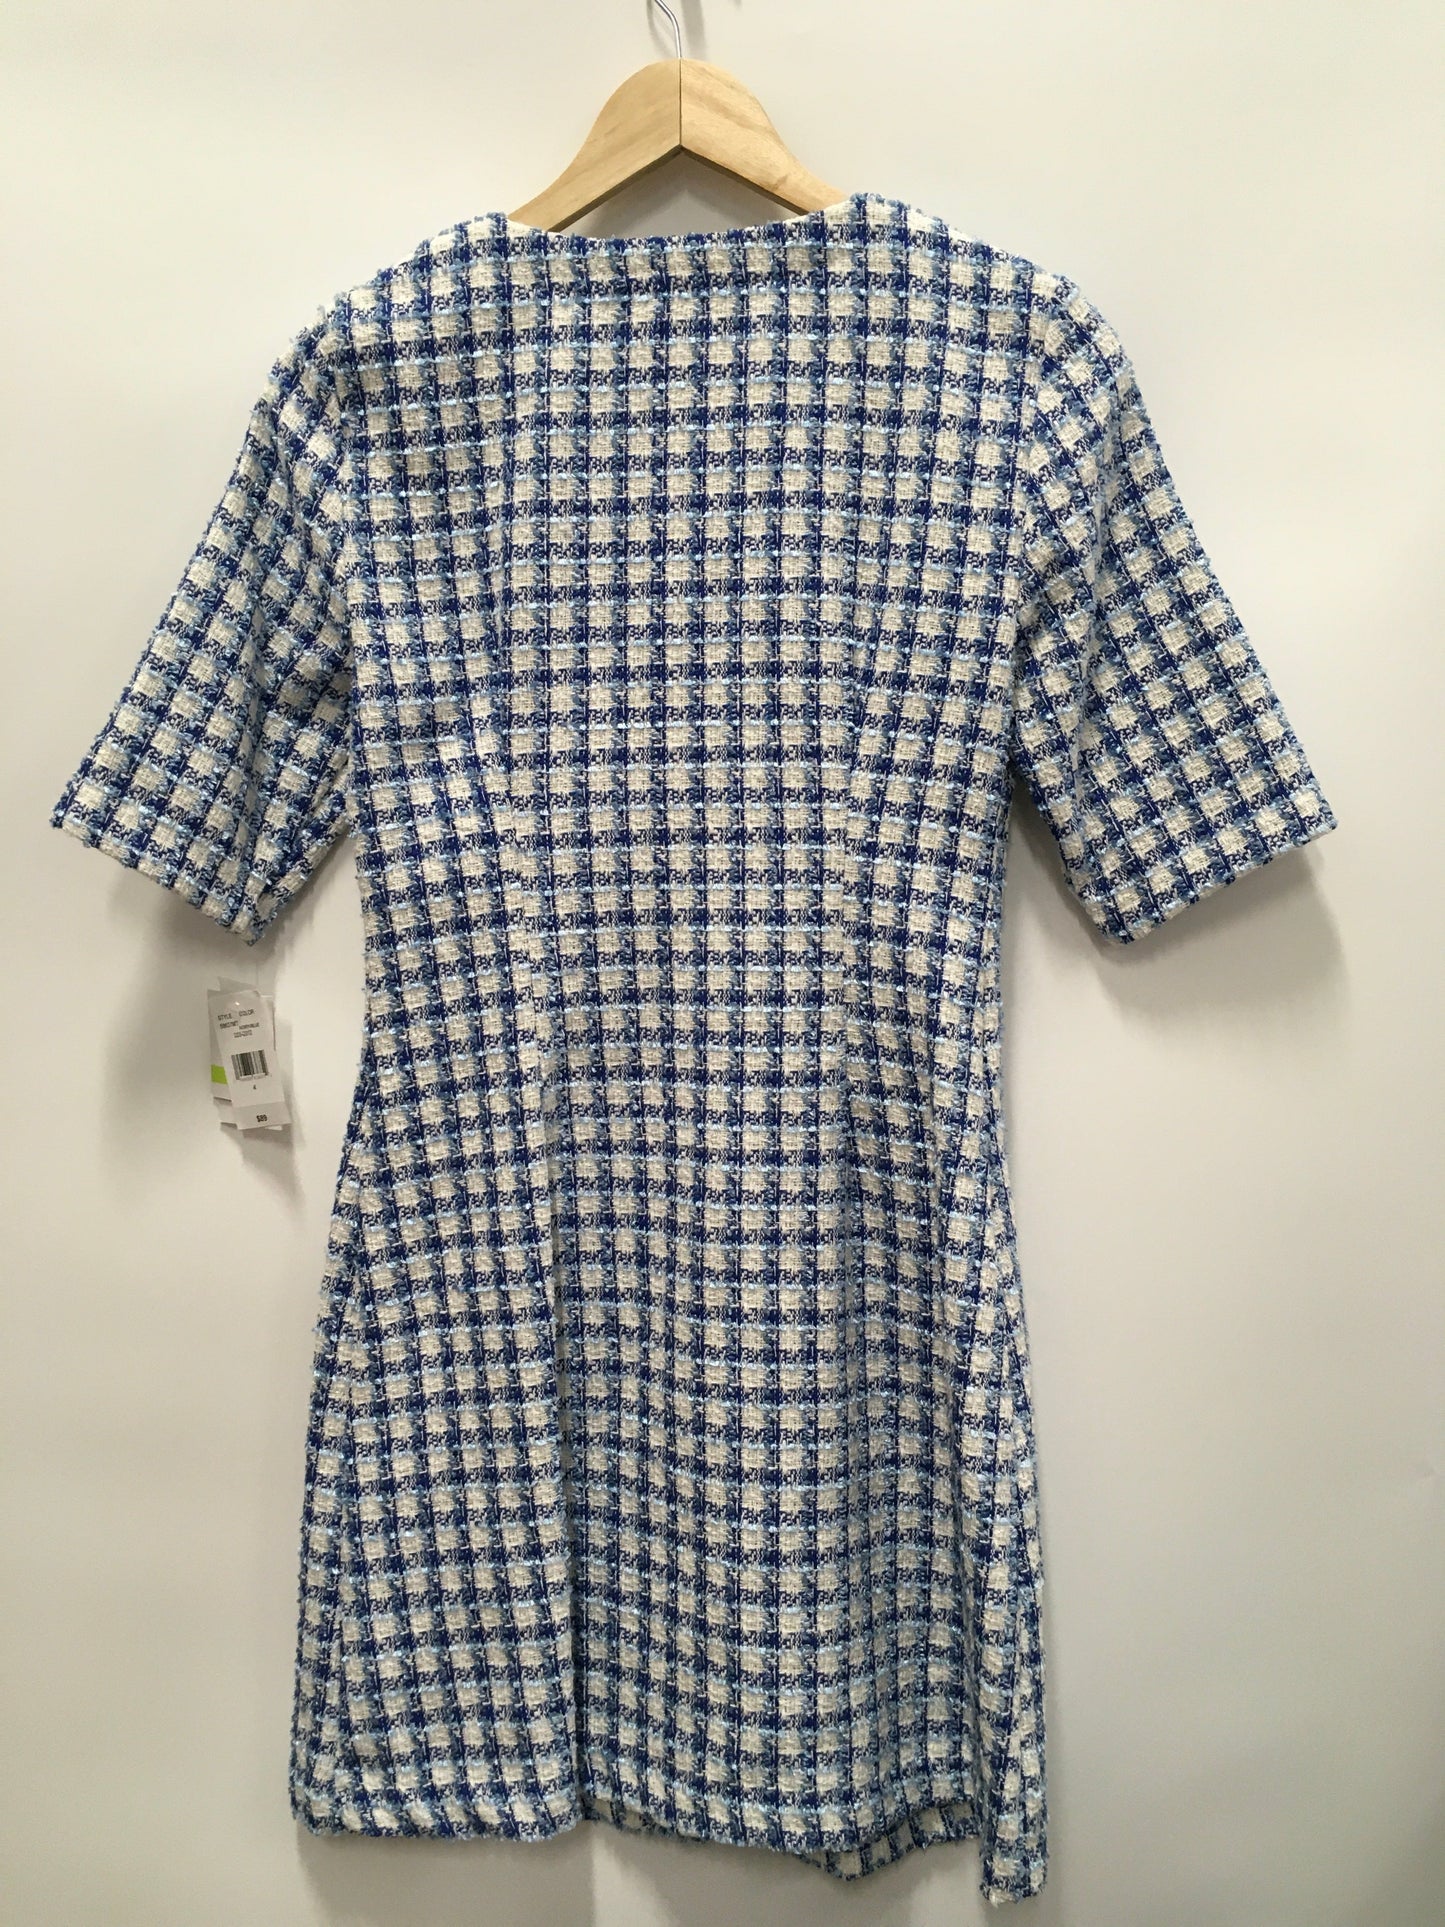 Blue & White Dress Work Clothes Mentor, Size S